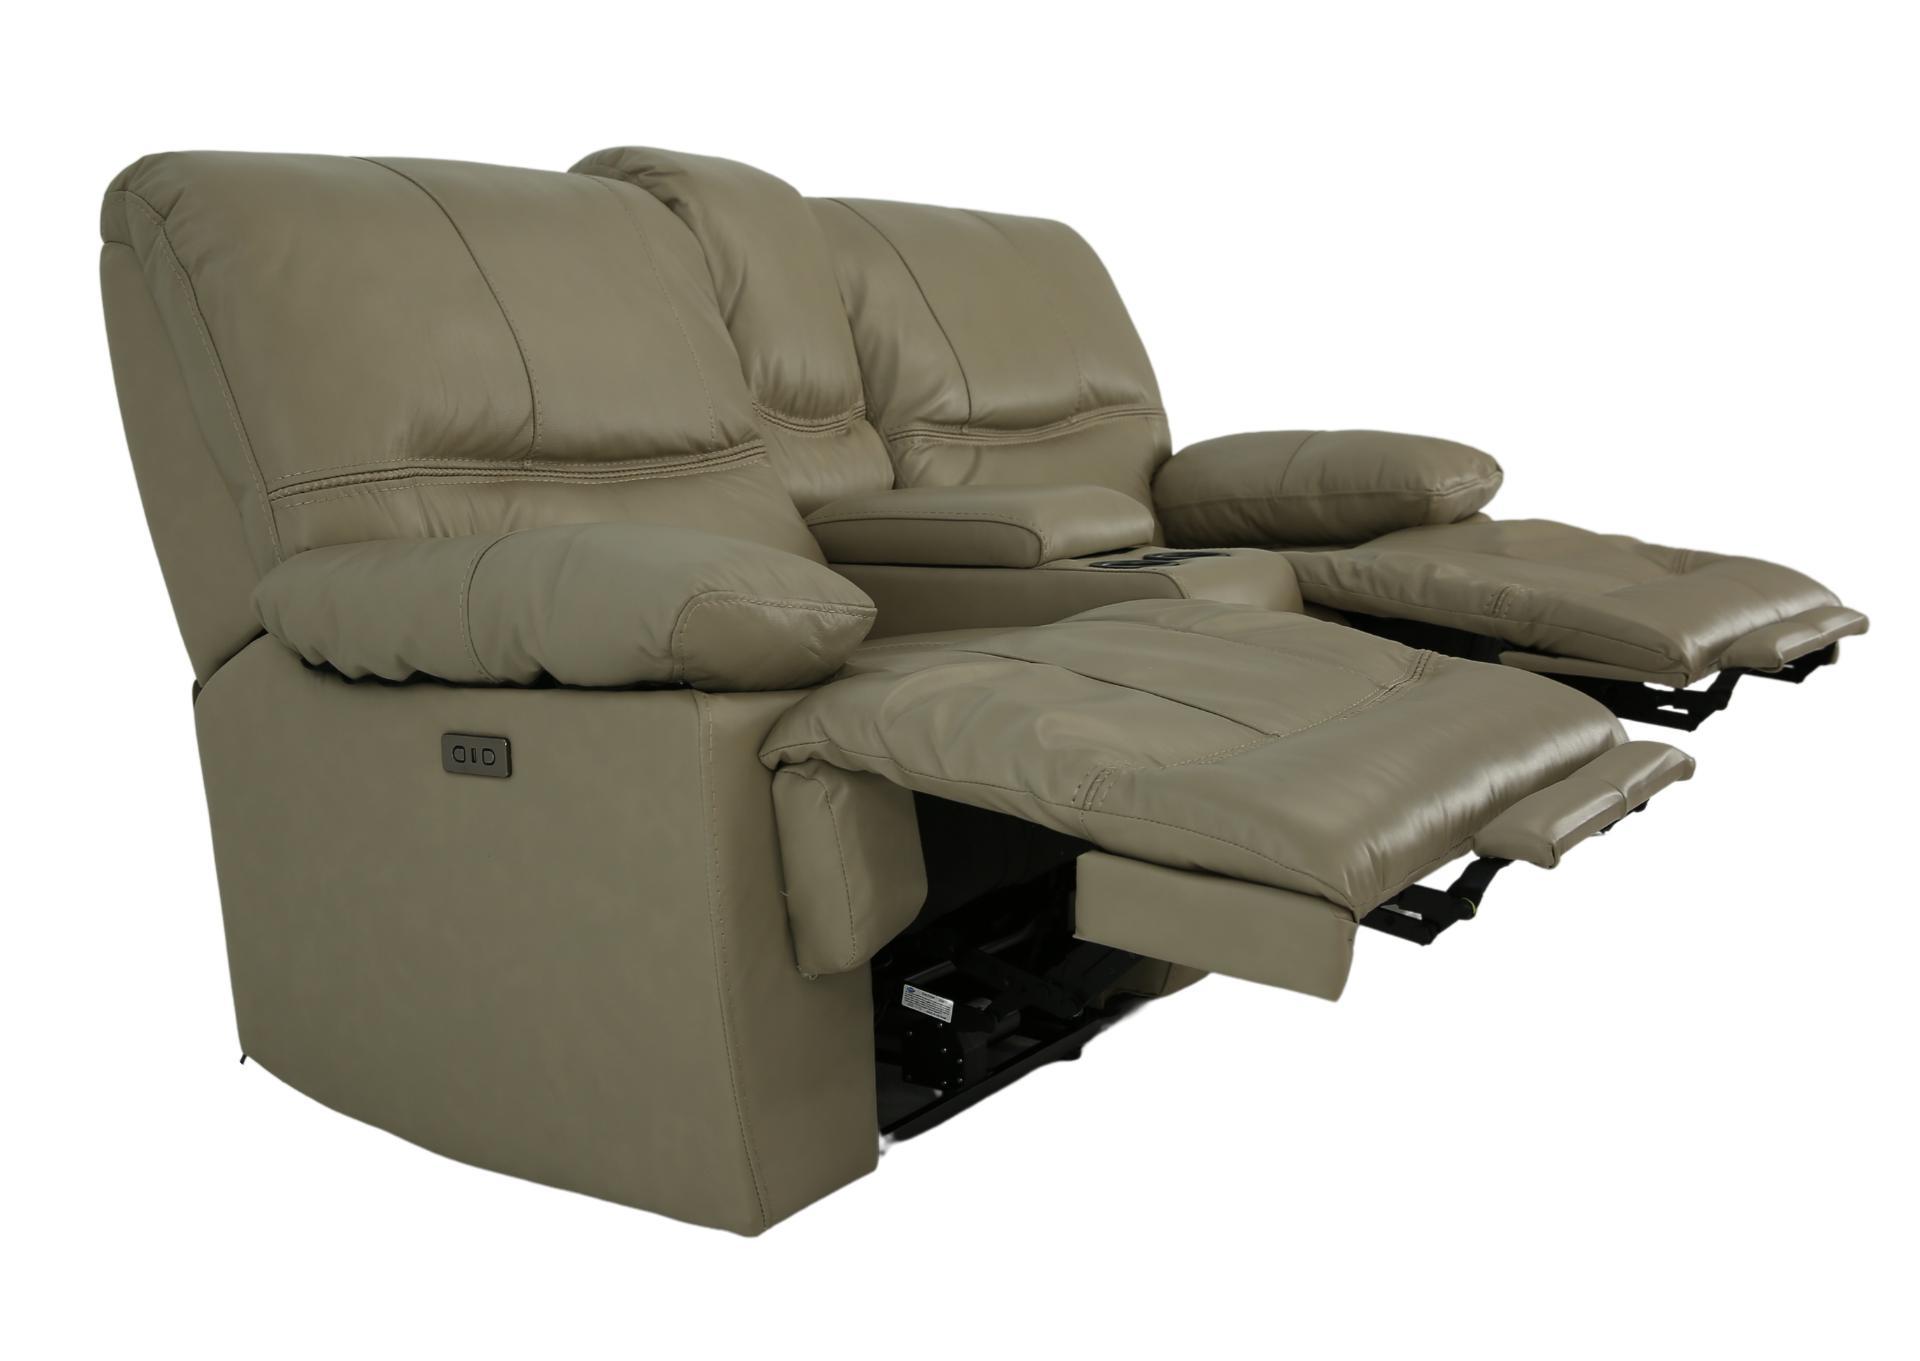 ODESSA TAUPE LEATHER 1P POWER ZERO GRAVITY RECLINING LOVESEAT WITH CONSOLE,CHEERS